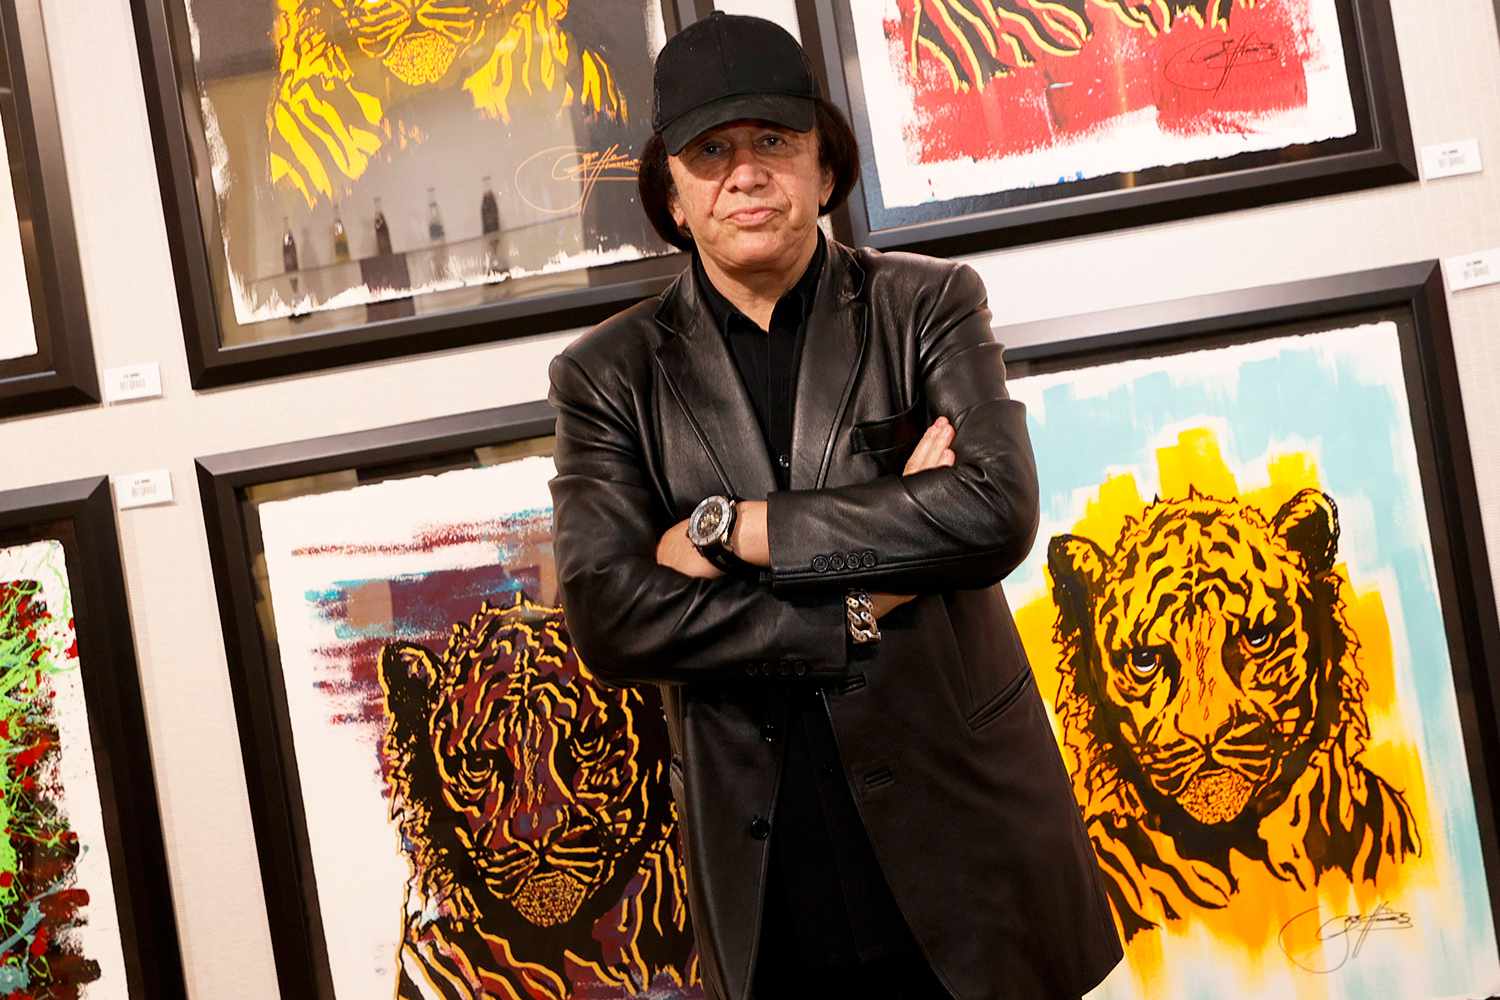 Kiss singer/bassist Gene Simmons poses in front of some of his works at the debut of Gene Simmons ArtWorks at Animazing Gallery at The Venetian Las Vegas on October 21, 2021 in Las Vegas, Nevada.